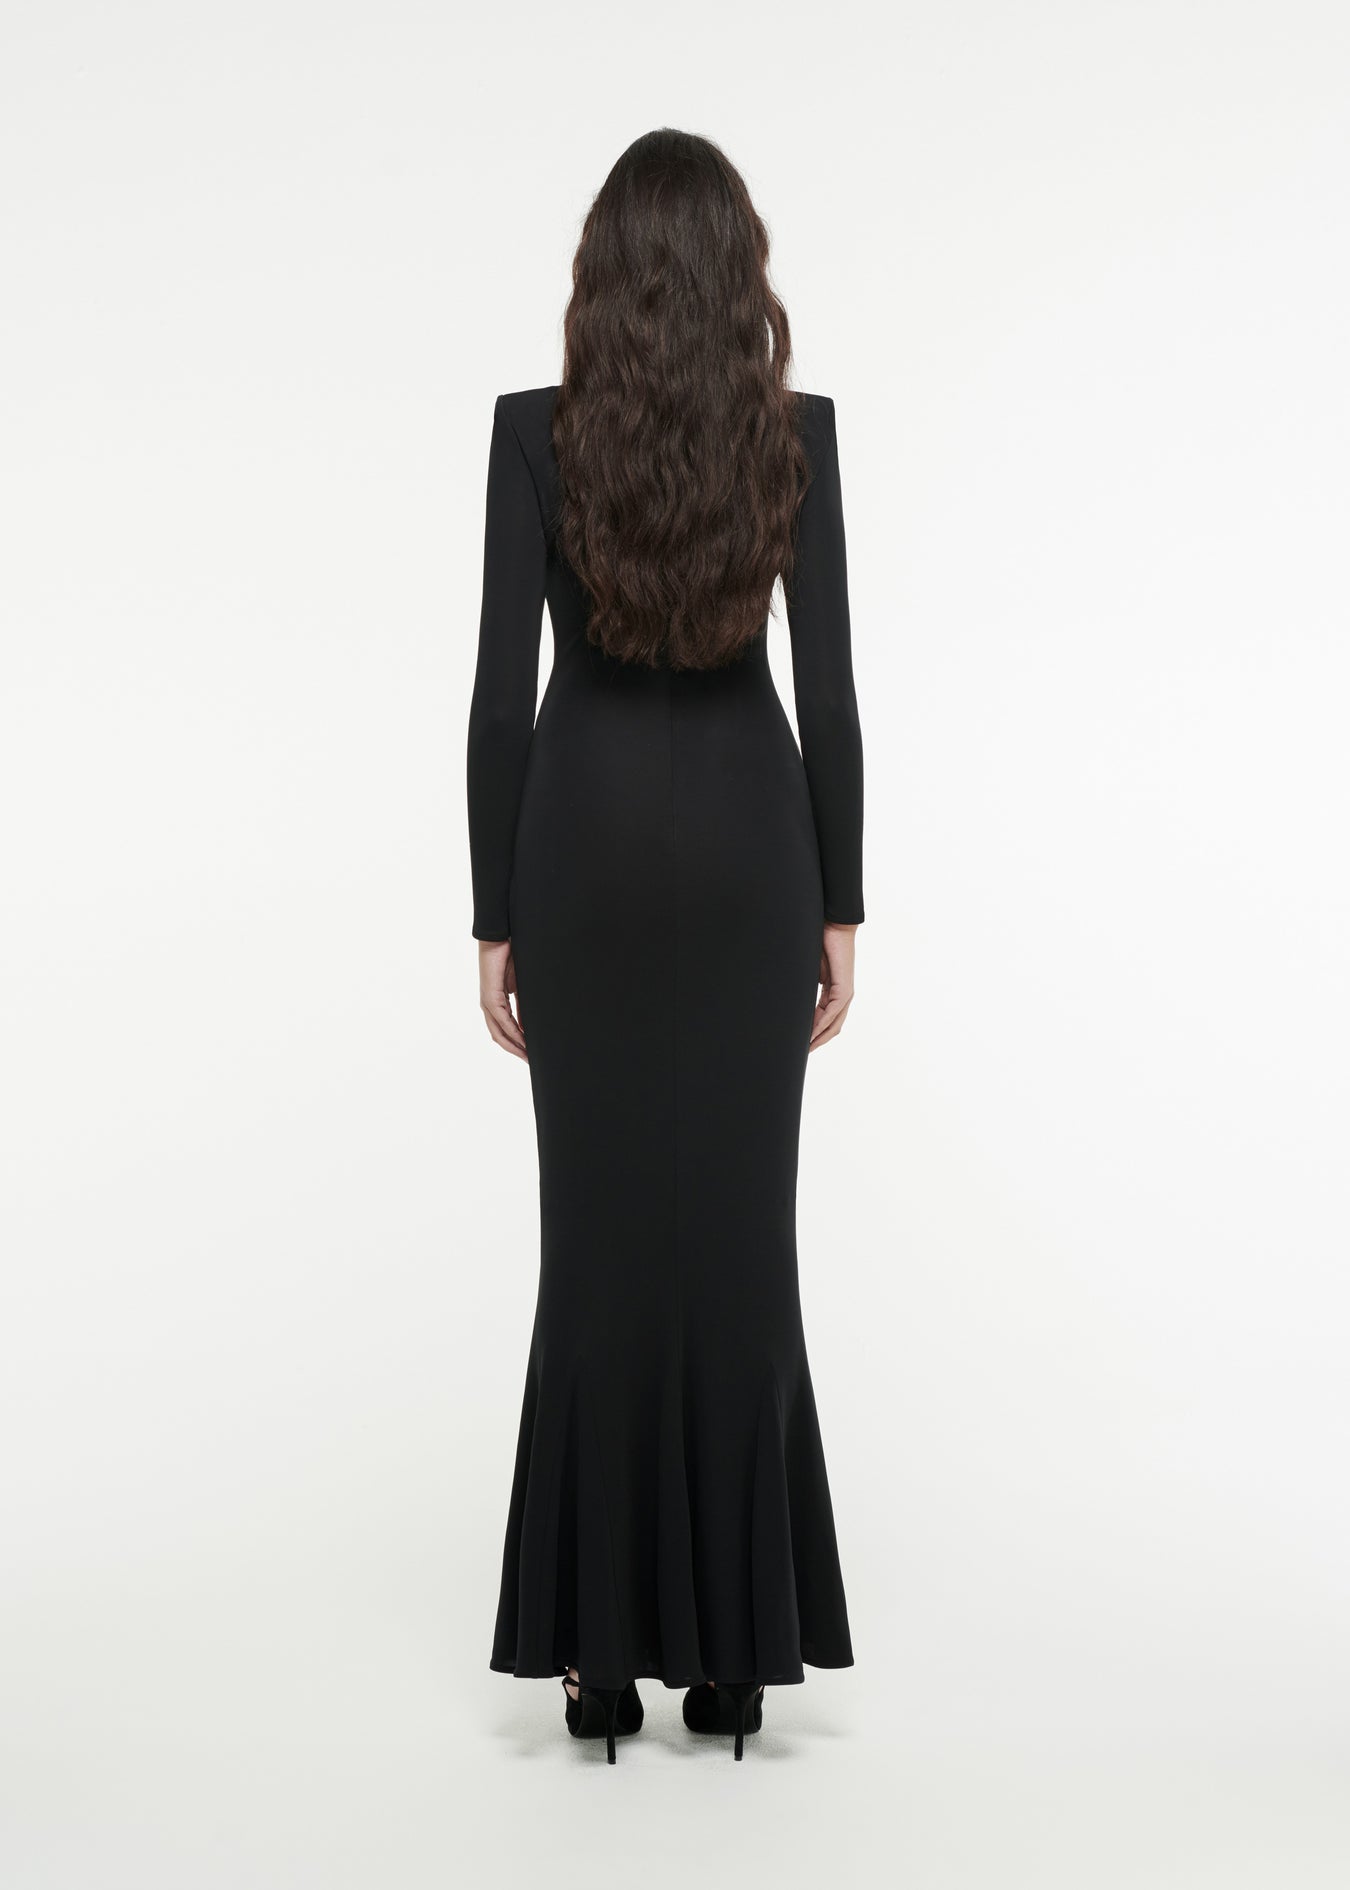 The back of a woman wearing the Long Sleeve Asymmetric Gown in Black 